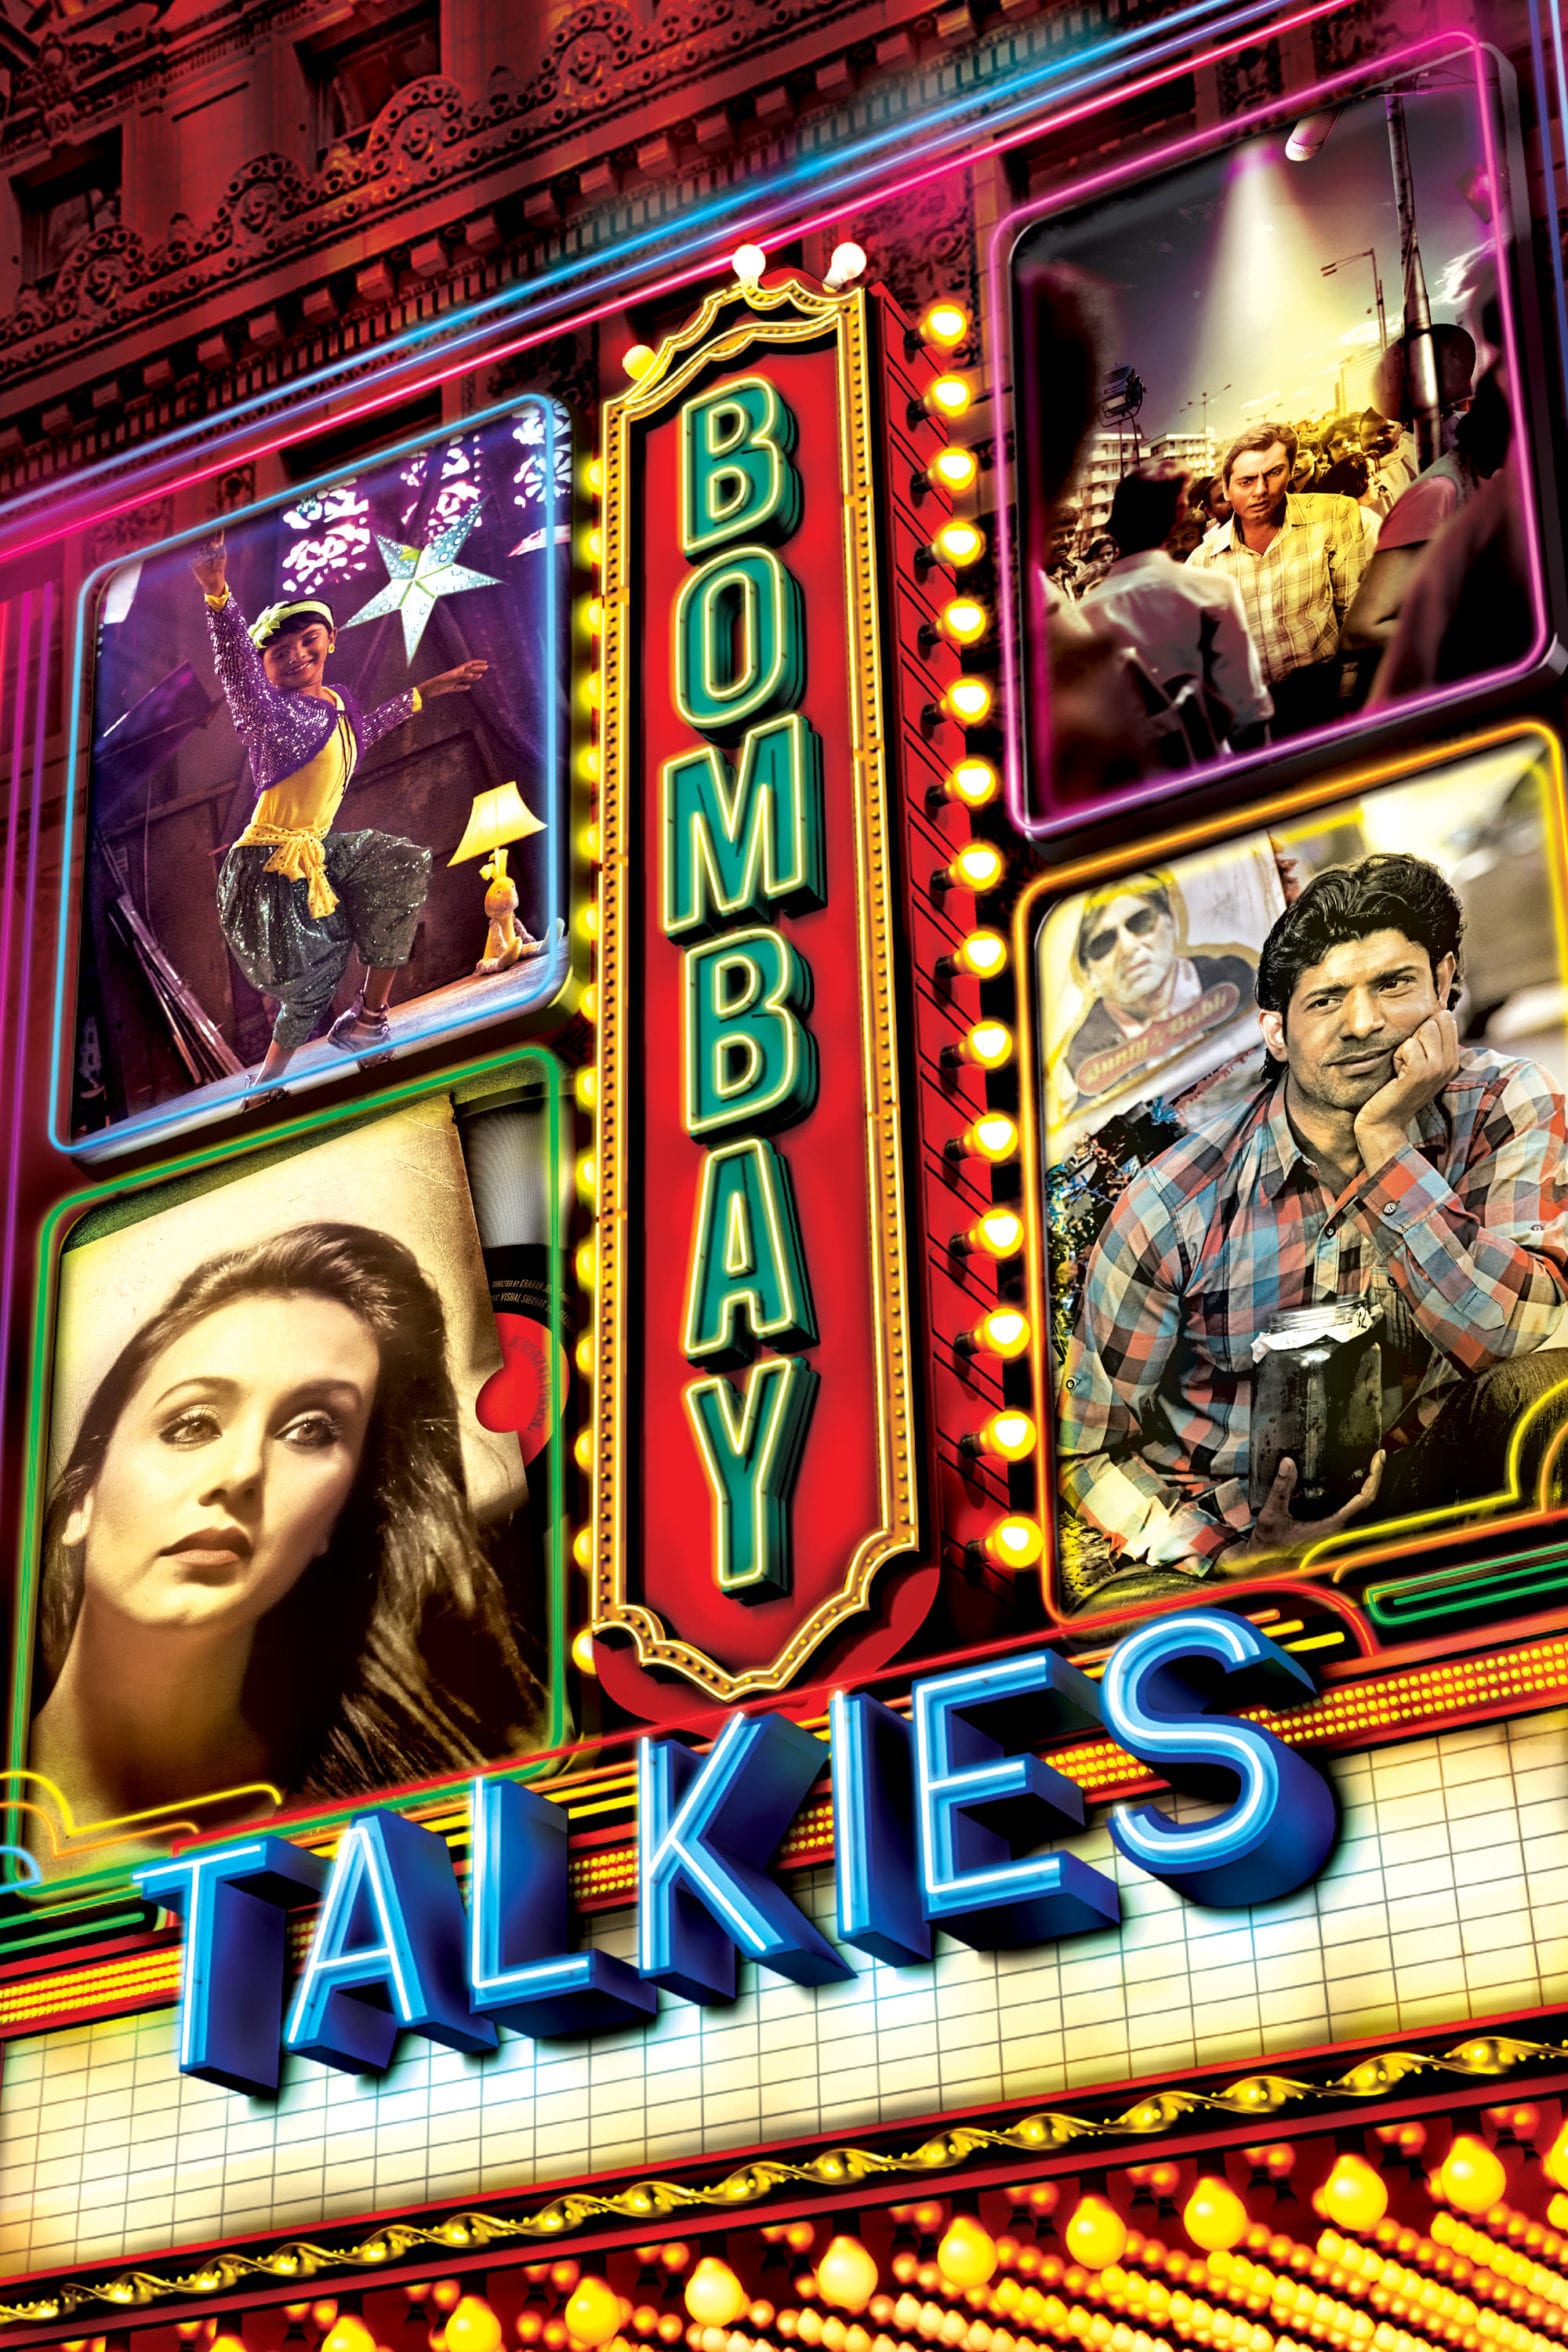 Poster for the movie "Bombay Talkies"